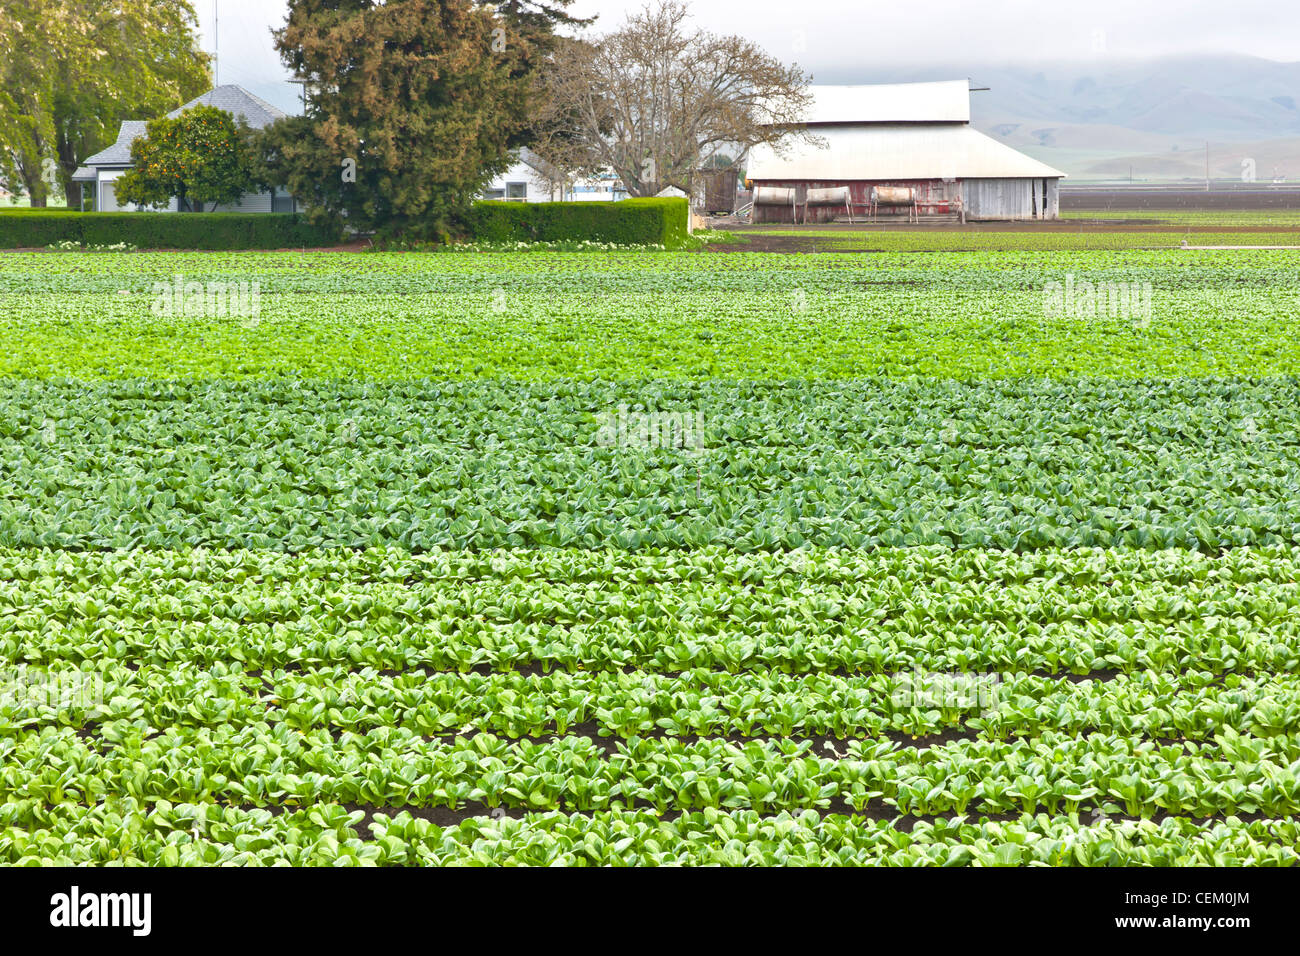 Rows of Young Bok Choy vegetable growing row crop. Stock Photo